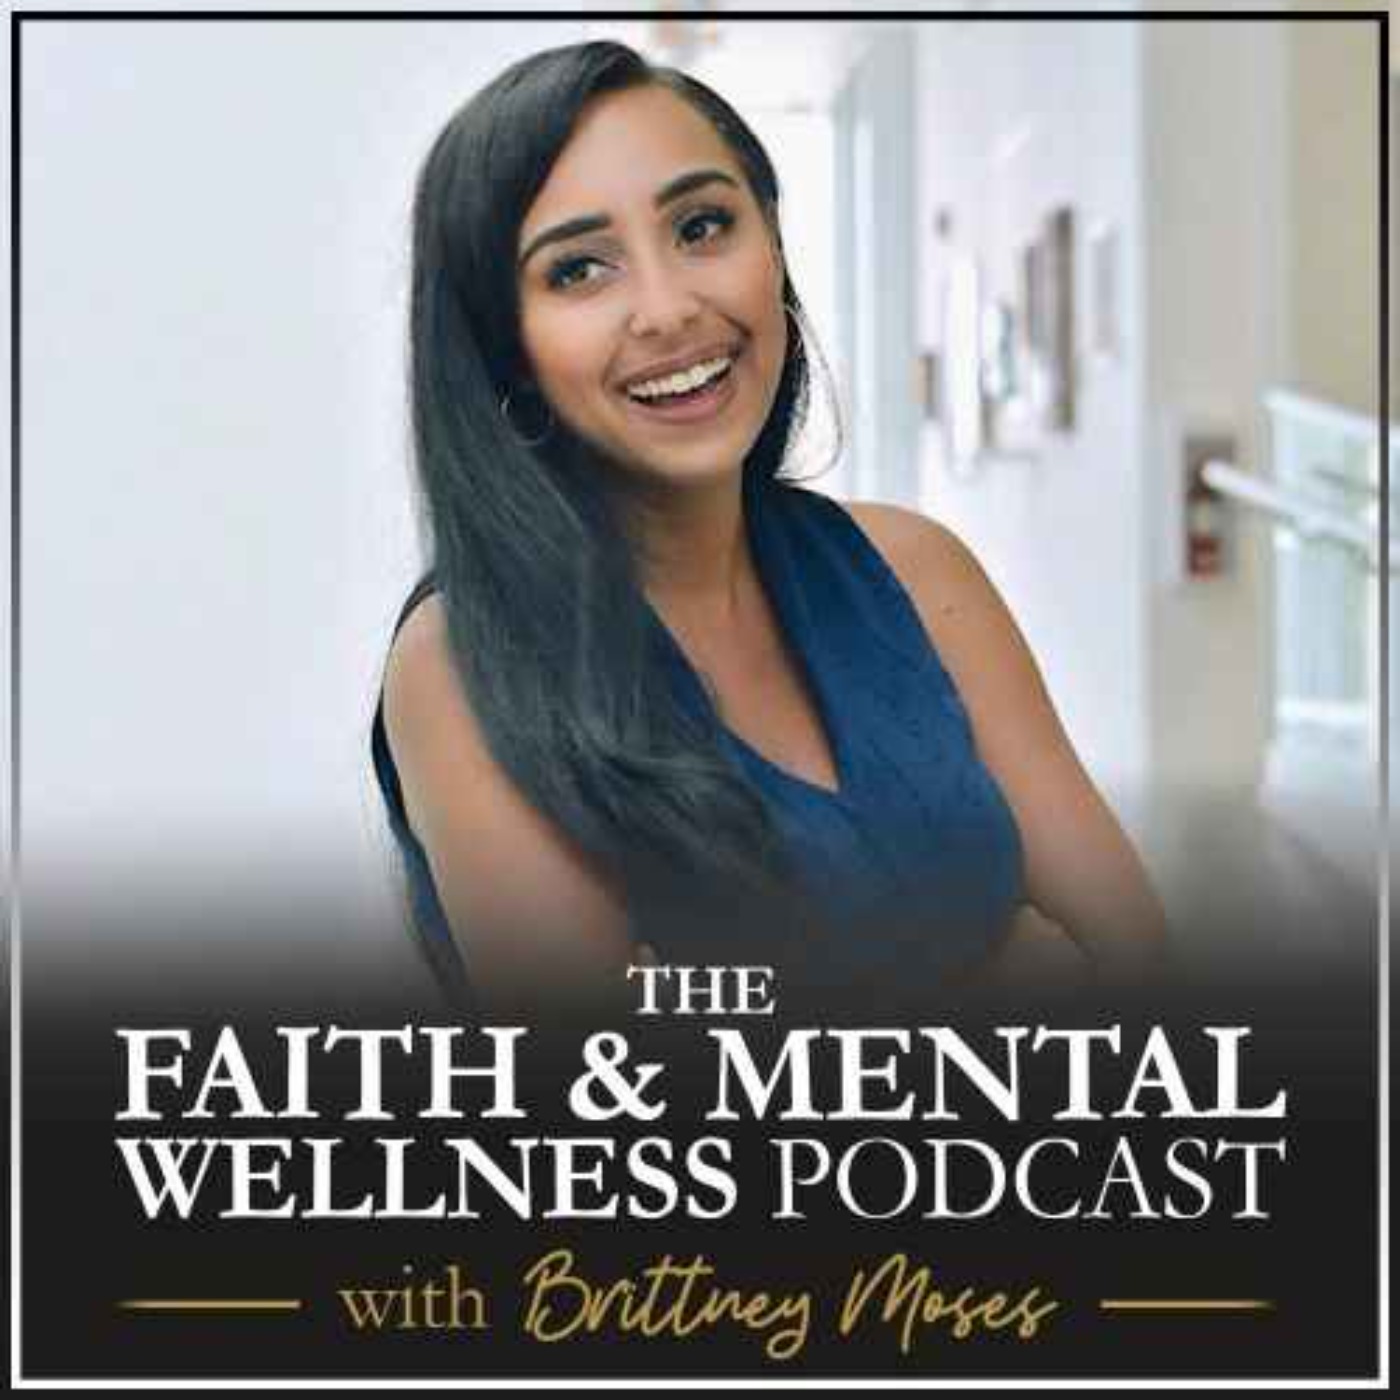 027: How to Manage Anxiety & OCD During Covid19 with Dr. Vania Manipod